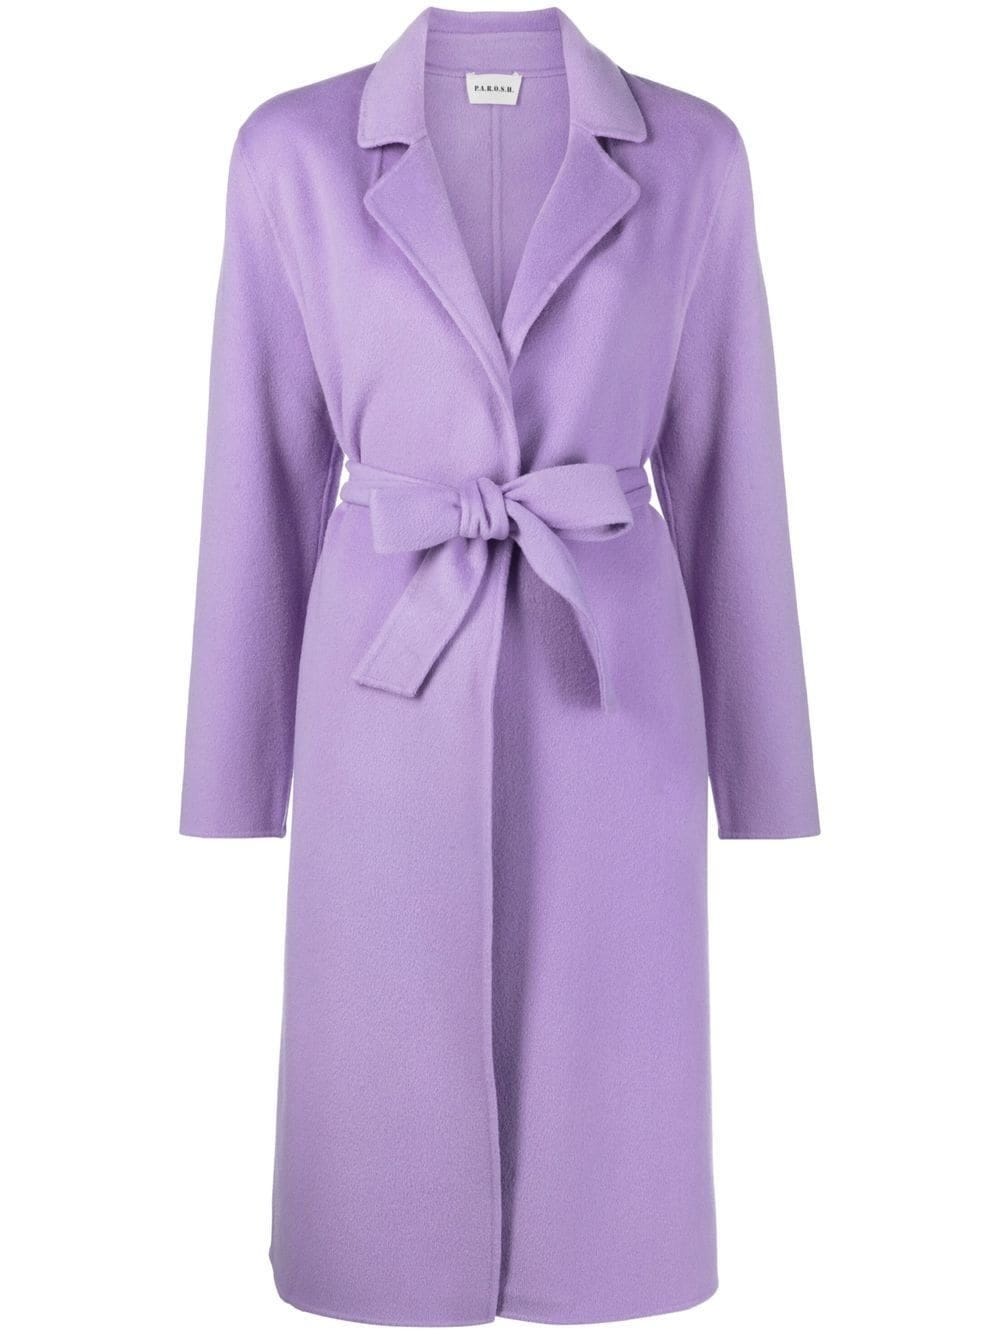 P.A.R.O.S.H LILAC WRAP COAT WITH BELT